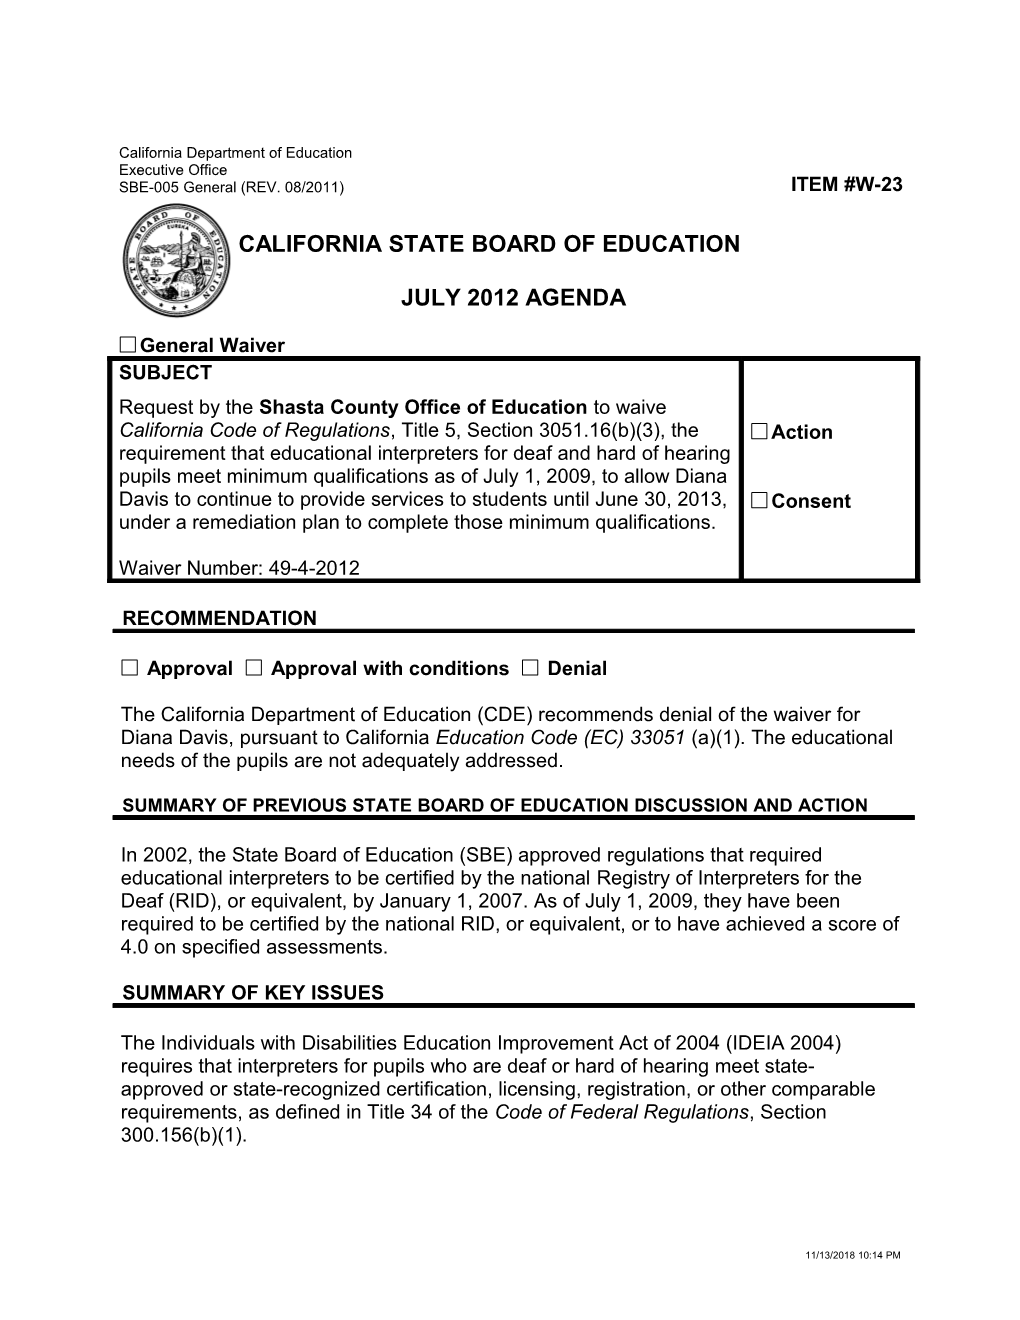 July 2012 Waiver Item W23 - Meeting Agendas (CA State Board of Education)